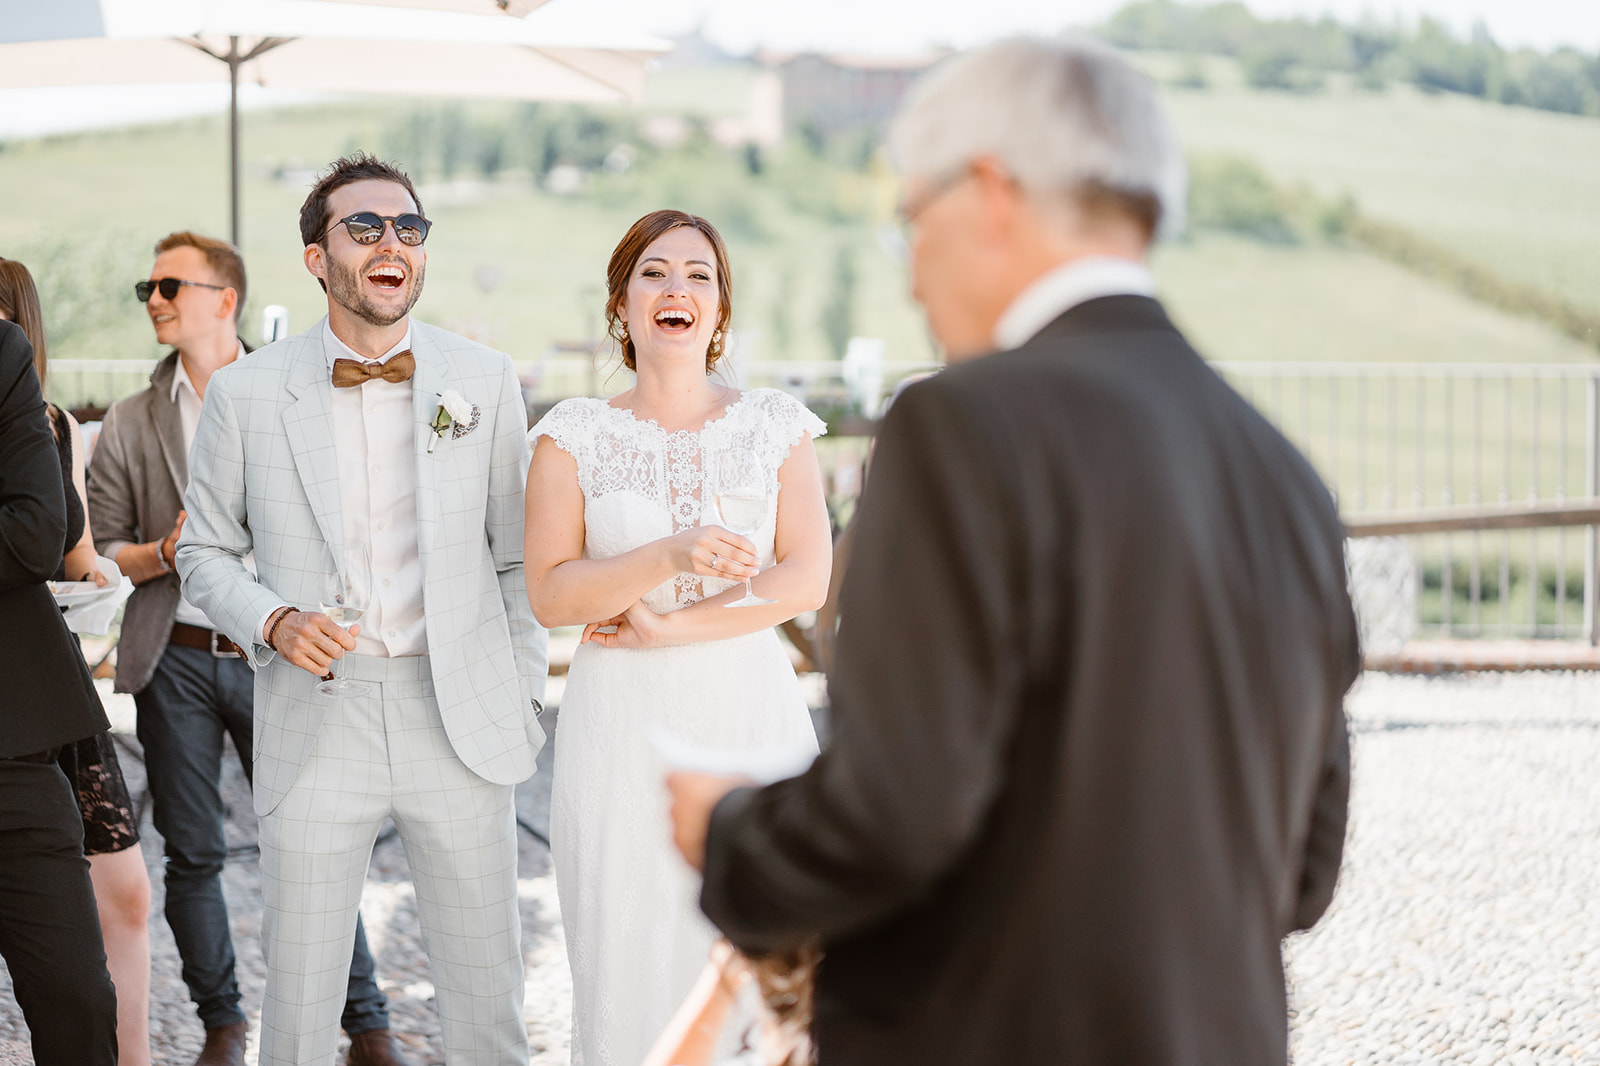 Bride's laughing at father's jokes